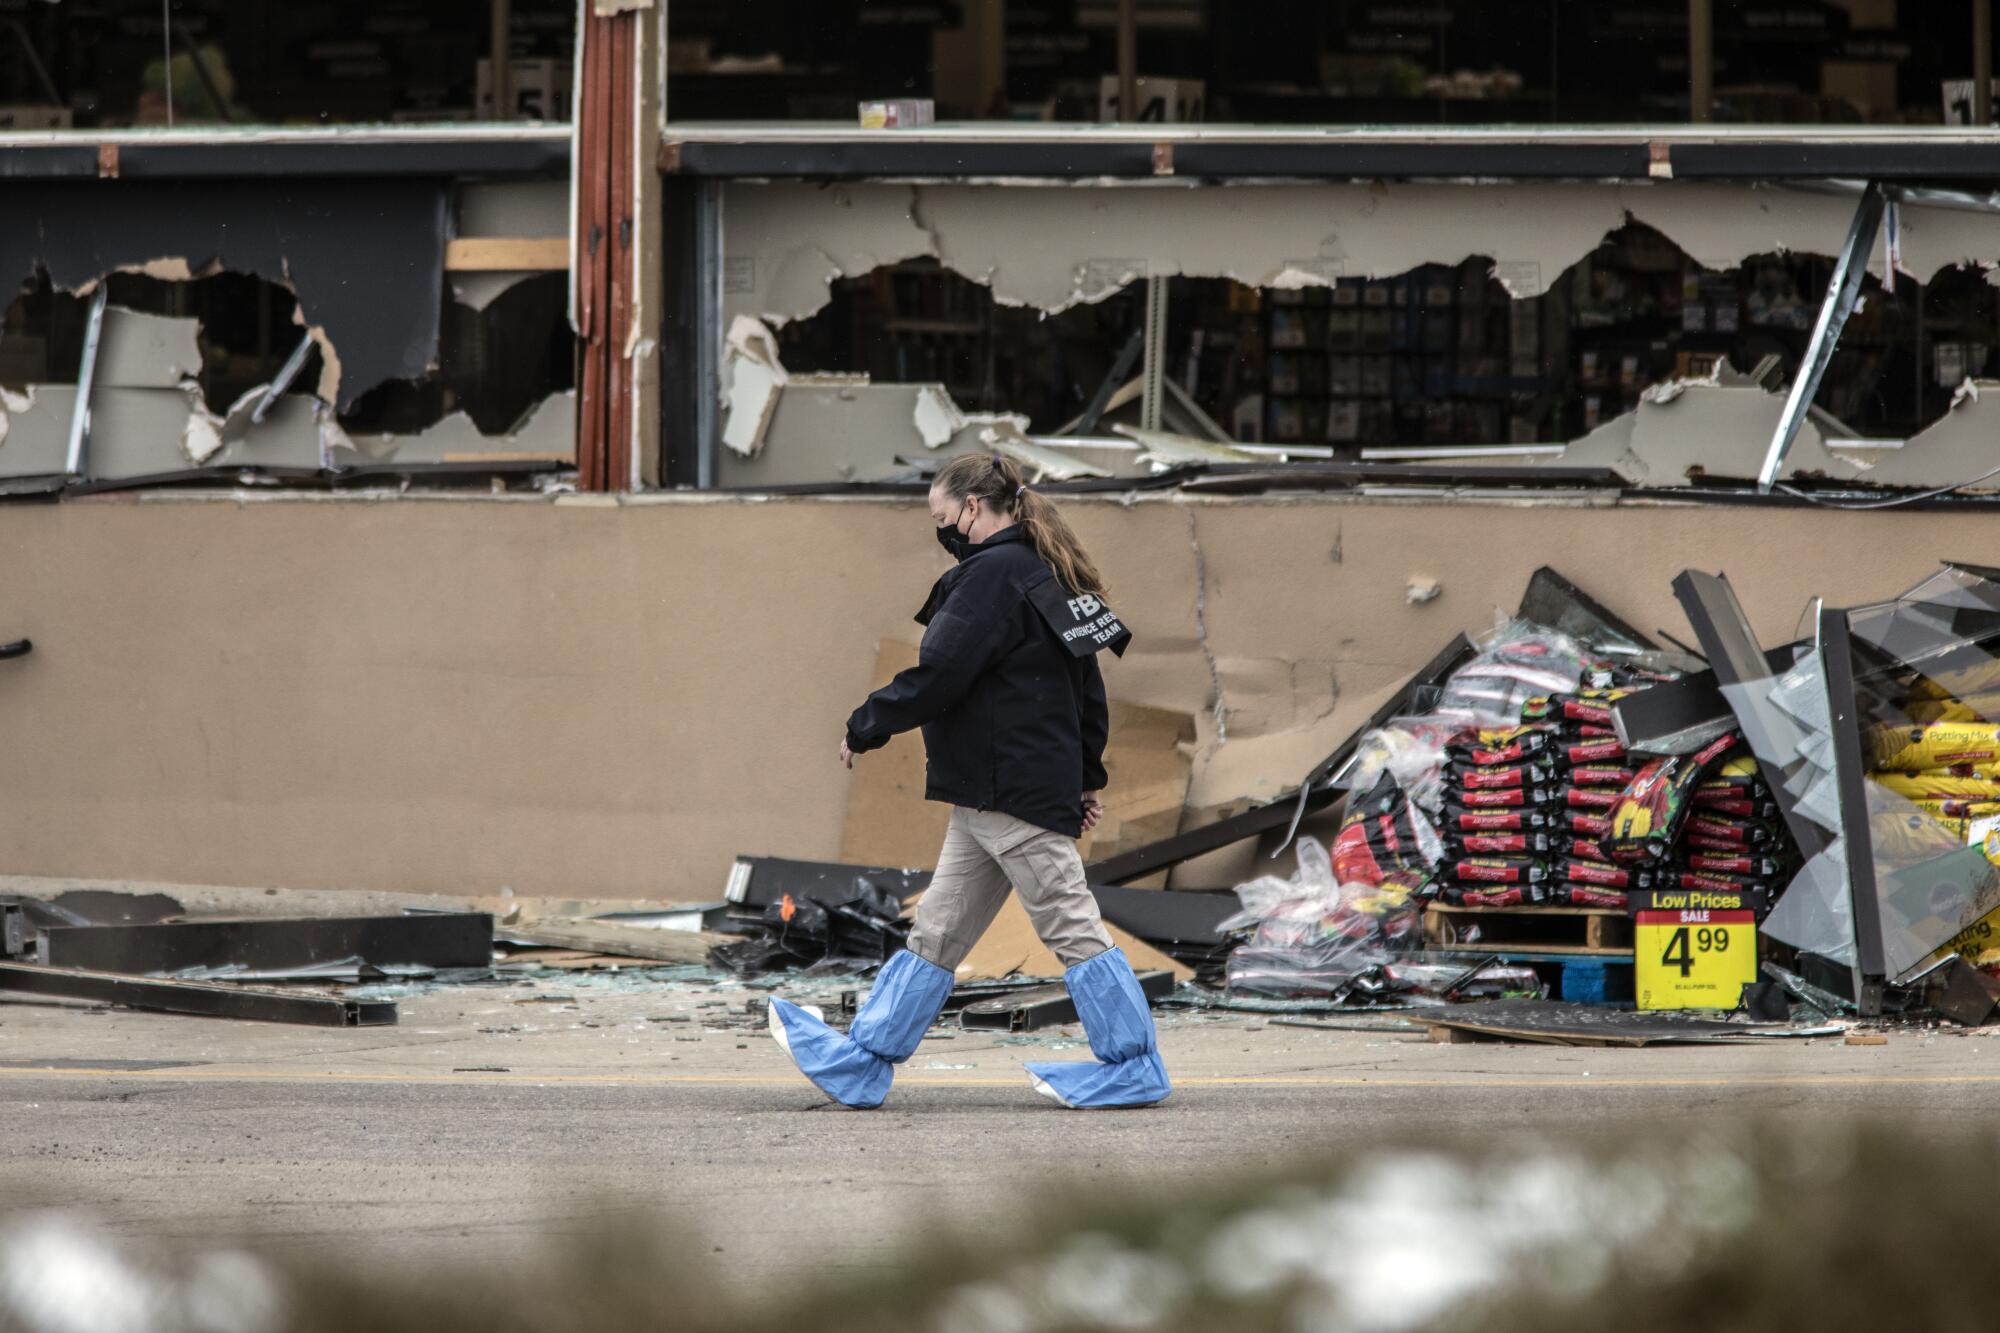 A crime scene technician in protective gear walks past the front of the King Soopers store, whose windows are all smashed